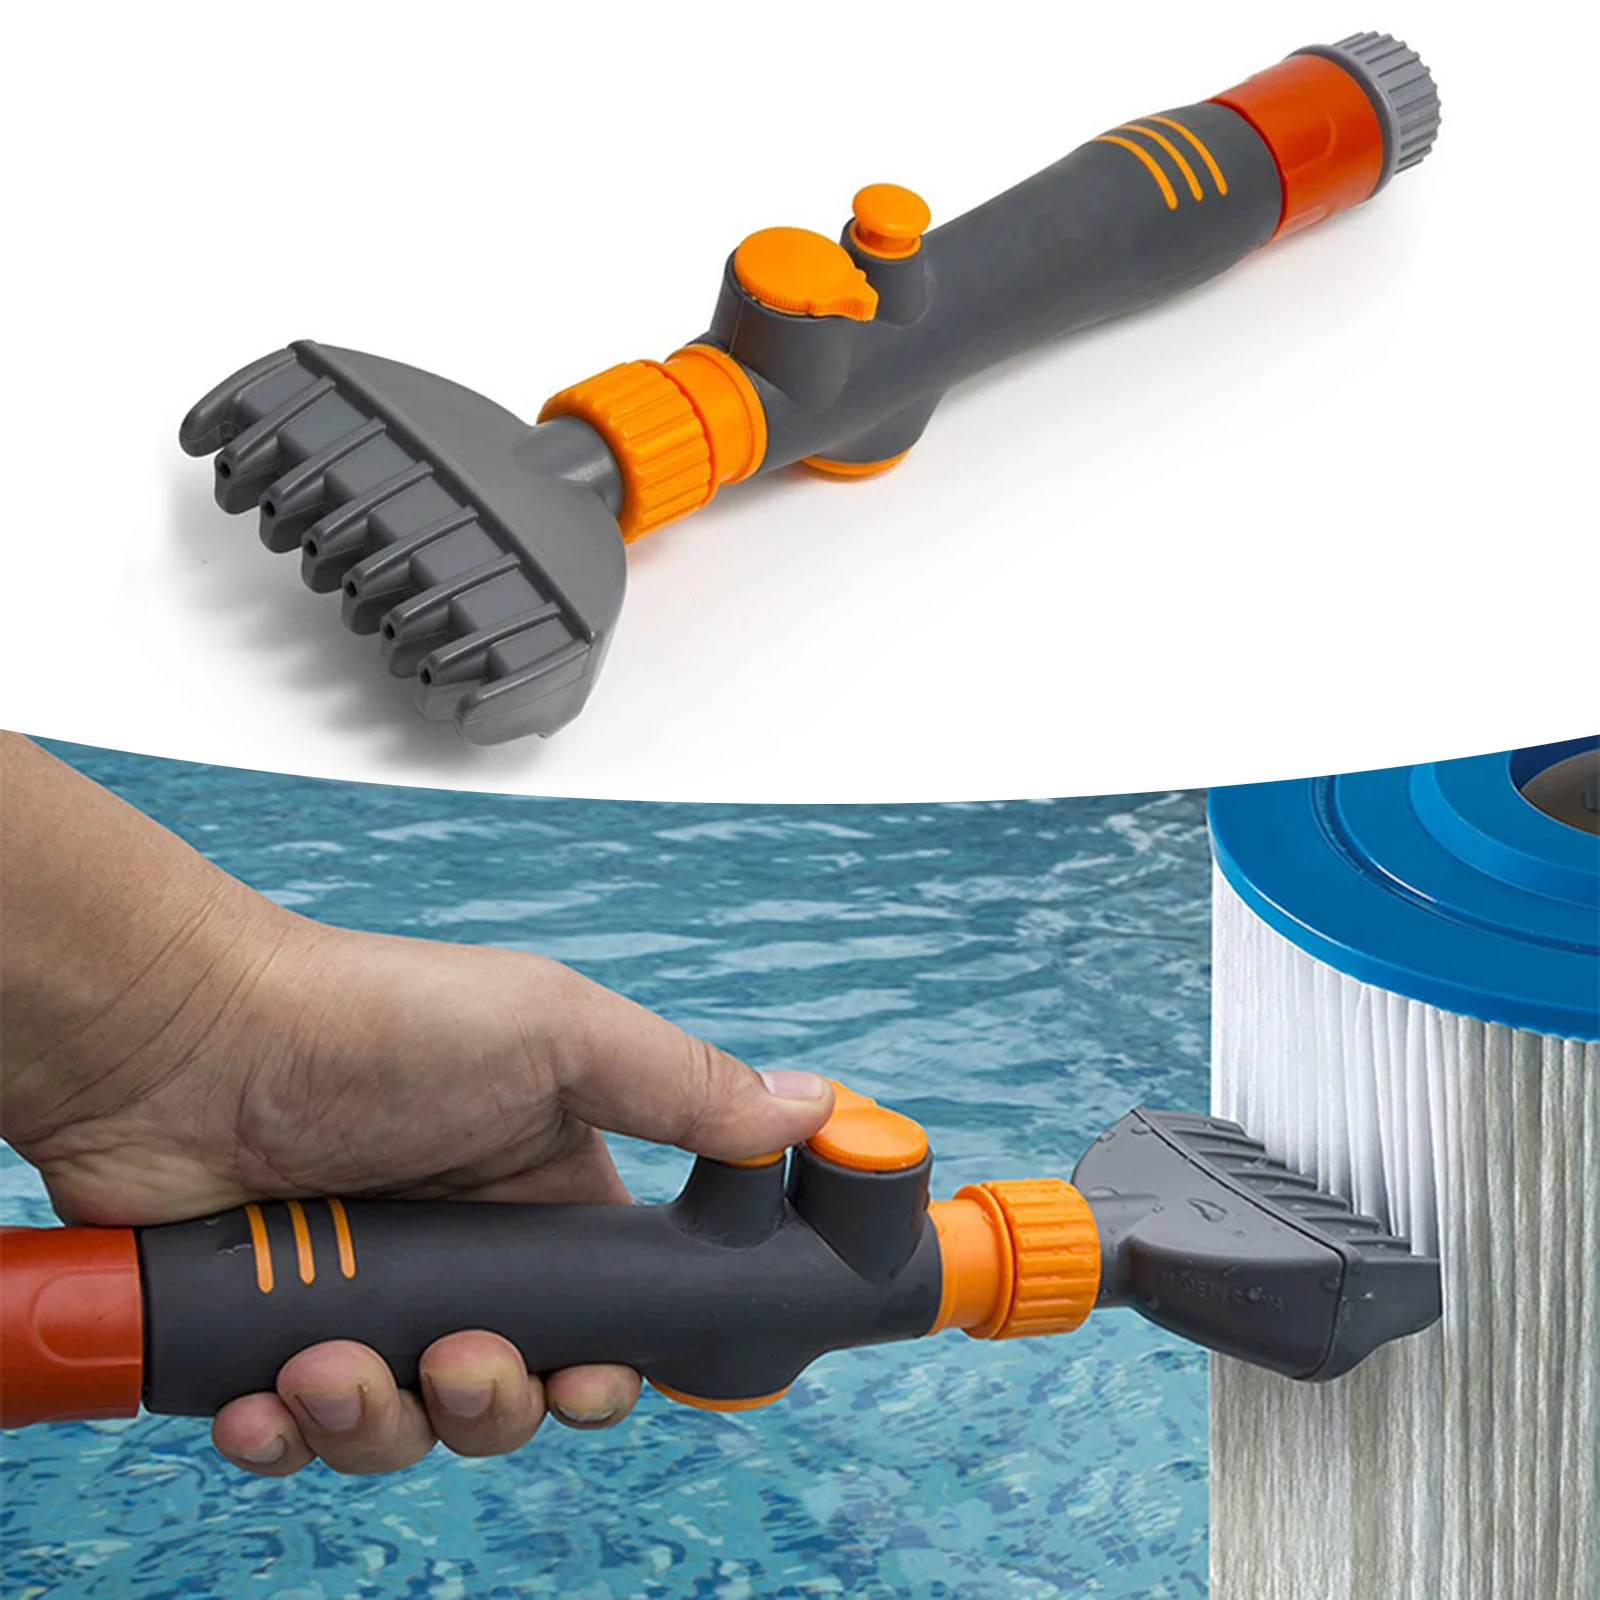 Swimming Pool Filter Cartridge Cleaner Removes Debris and Dirt for Pool Filter Spa and Pool Cartridge Cleaner Tool. 